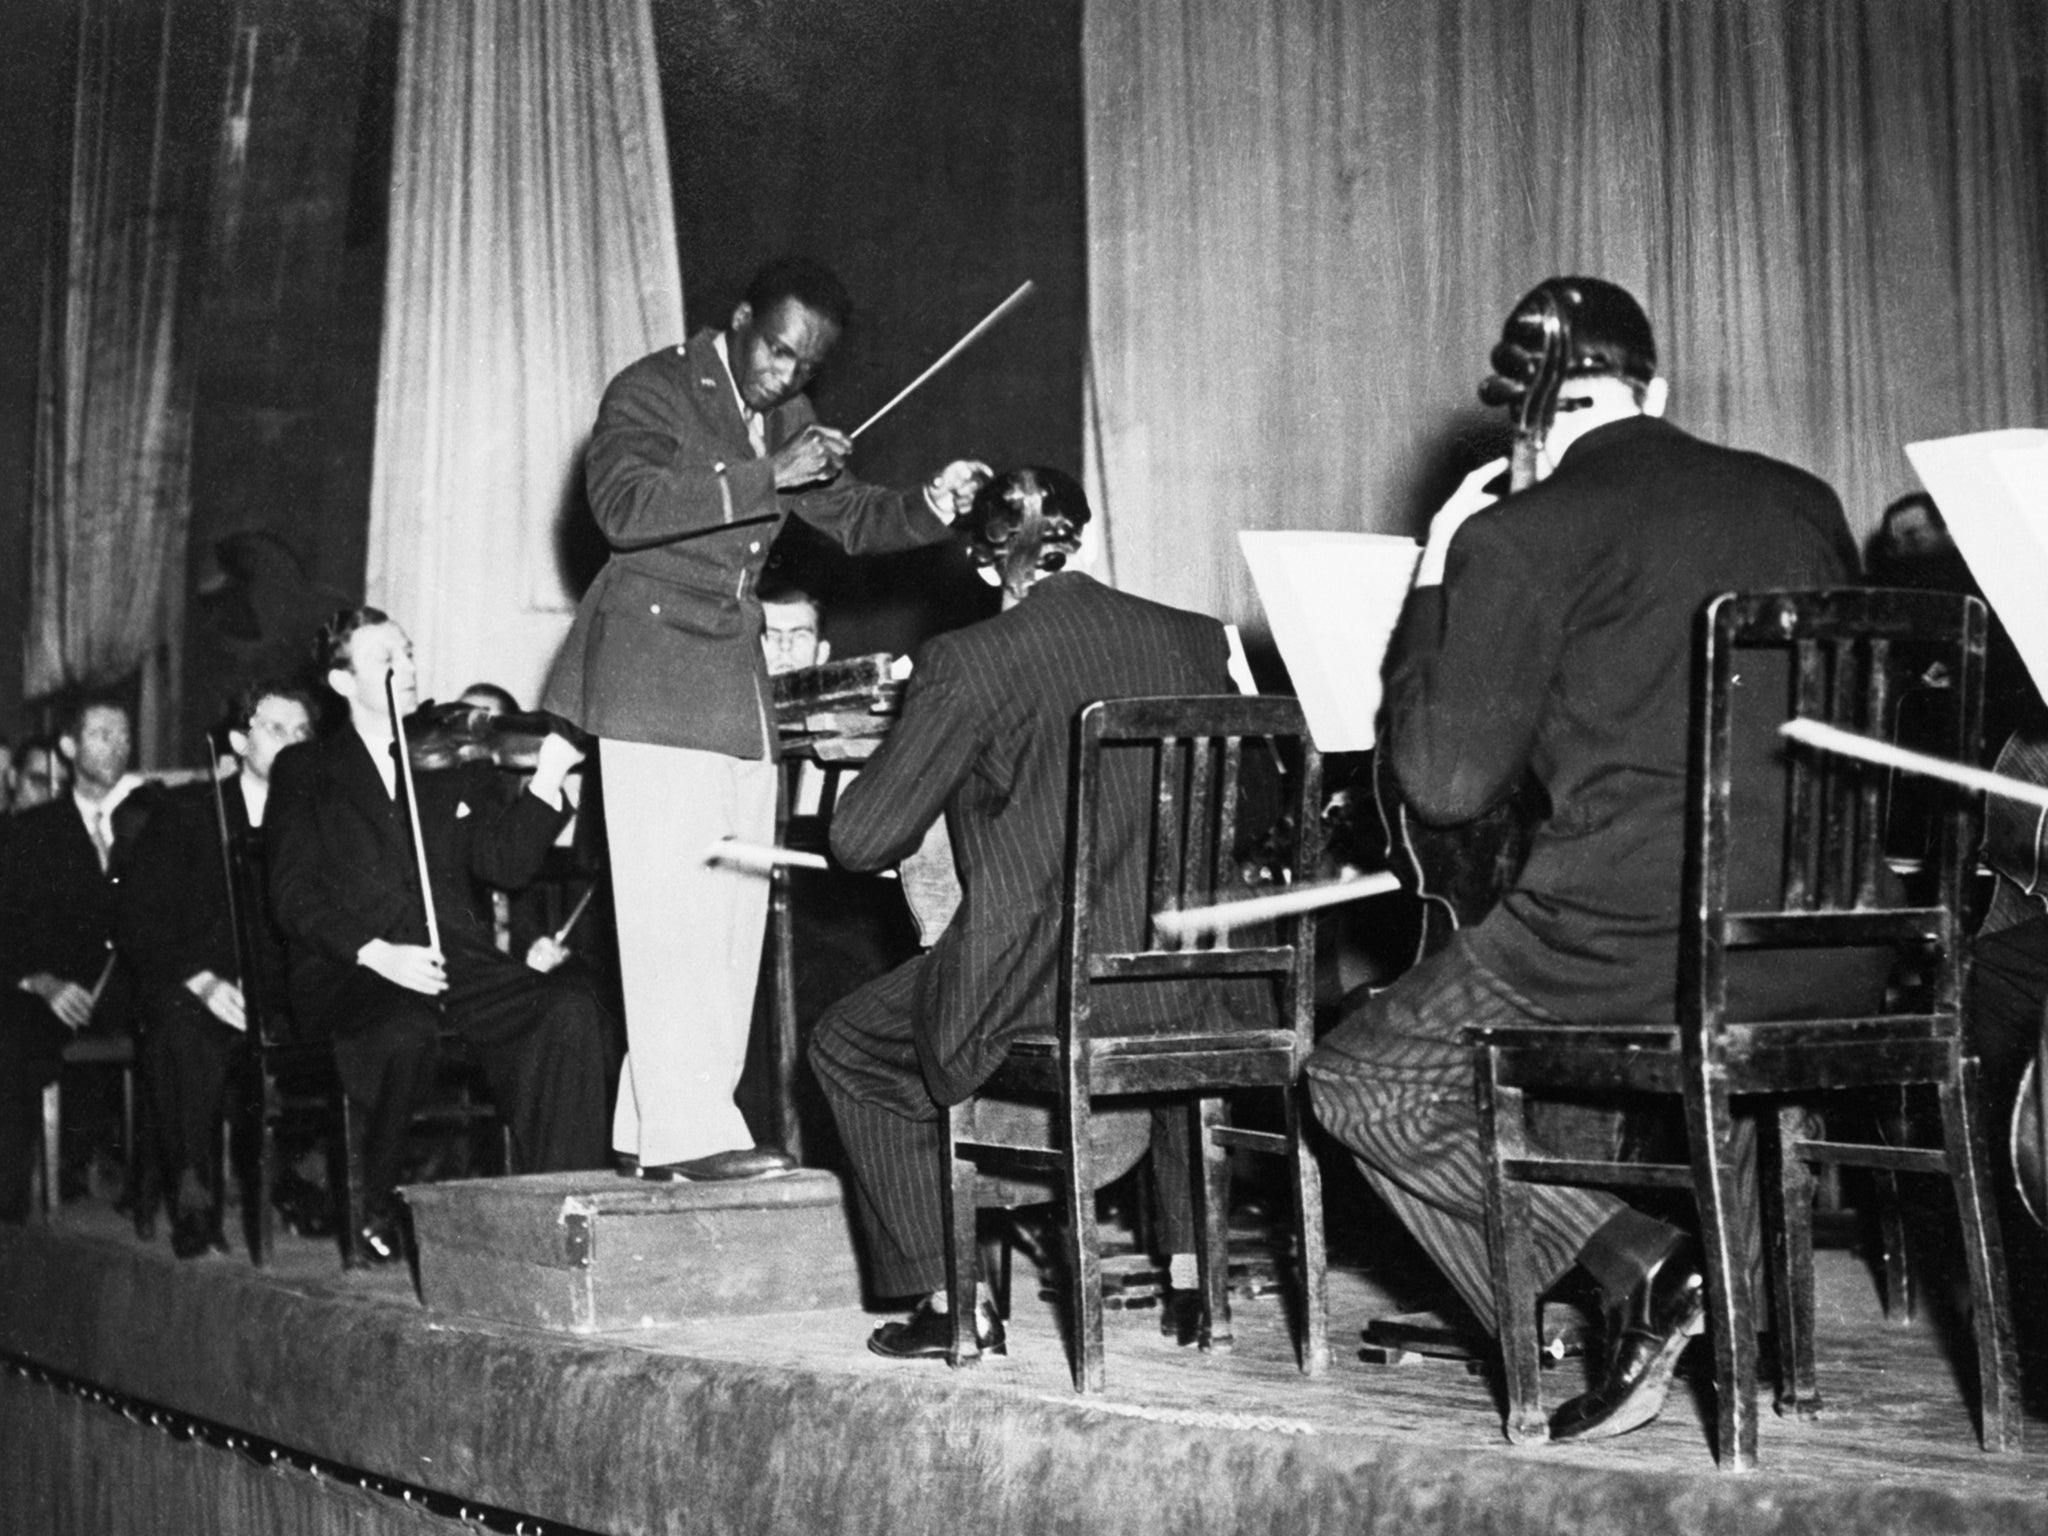 Rudolph Dunbar leads the Berlin Philharmonic orchestra in 1945